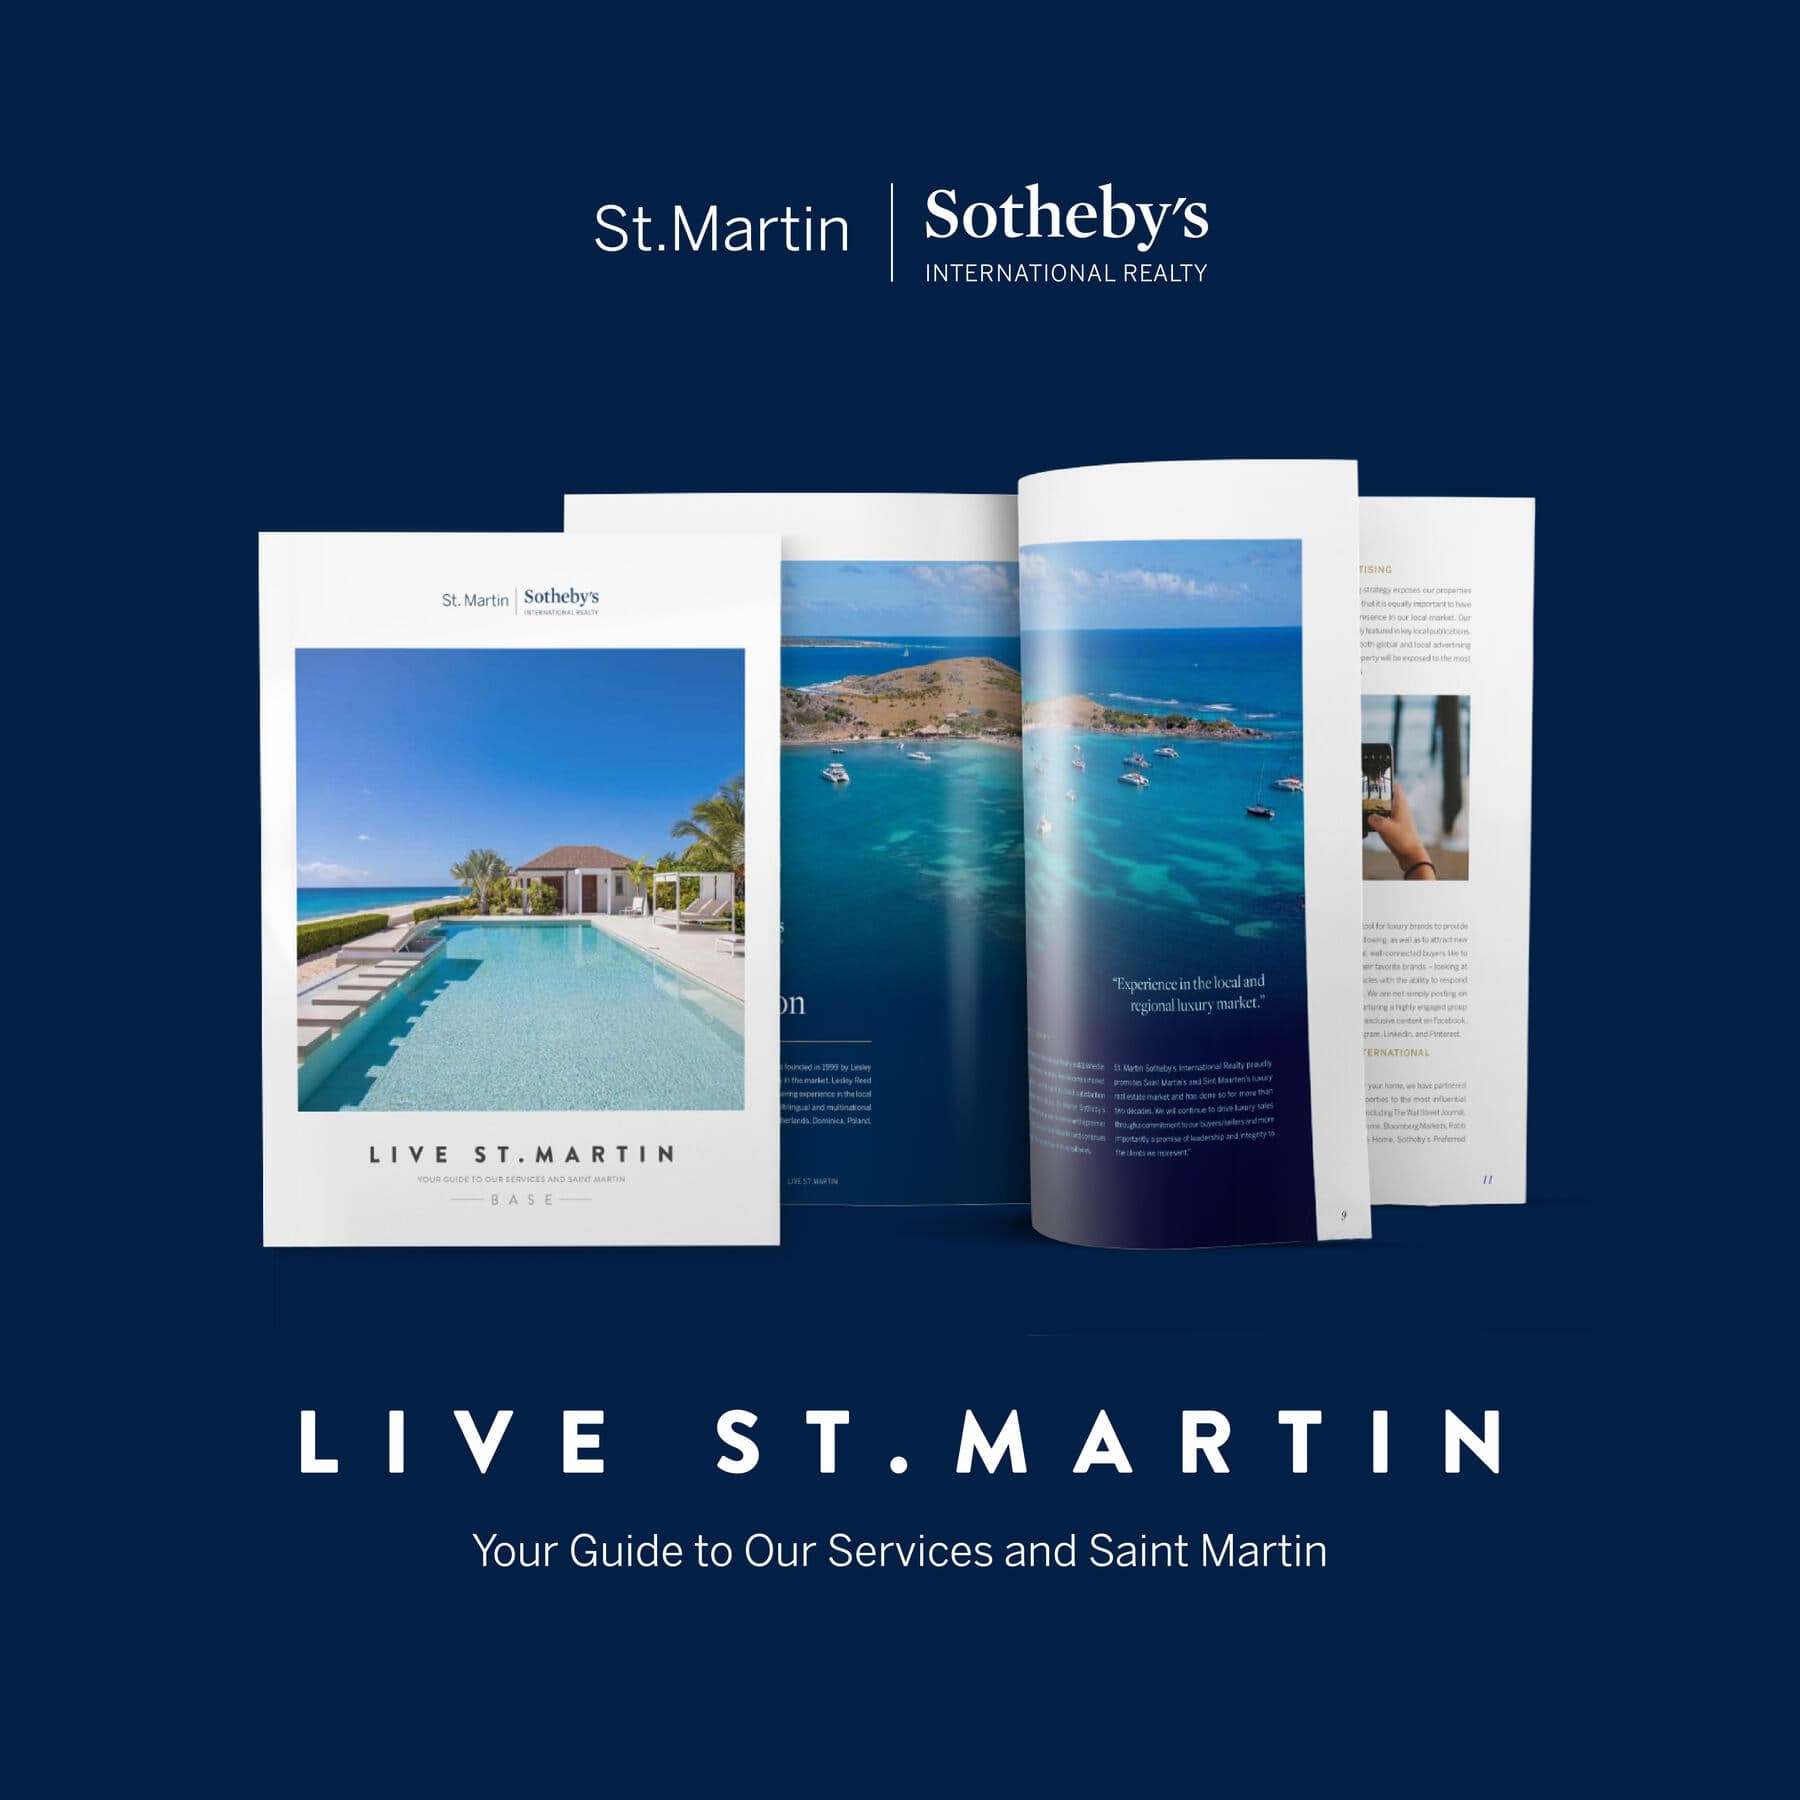 Image Feature Live St. Martin